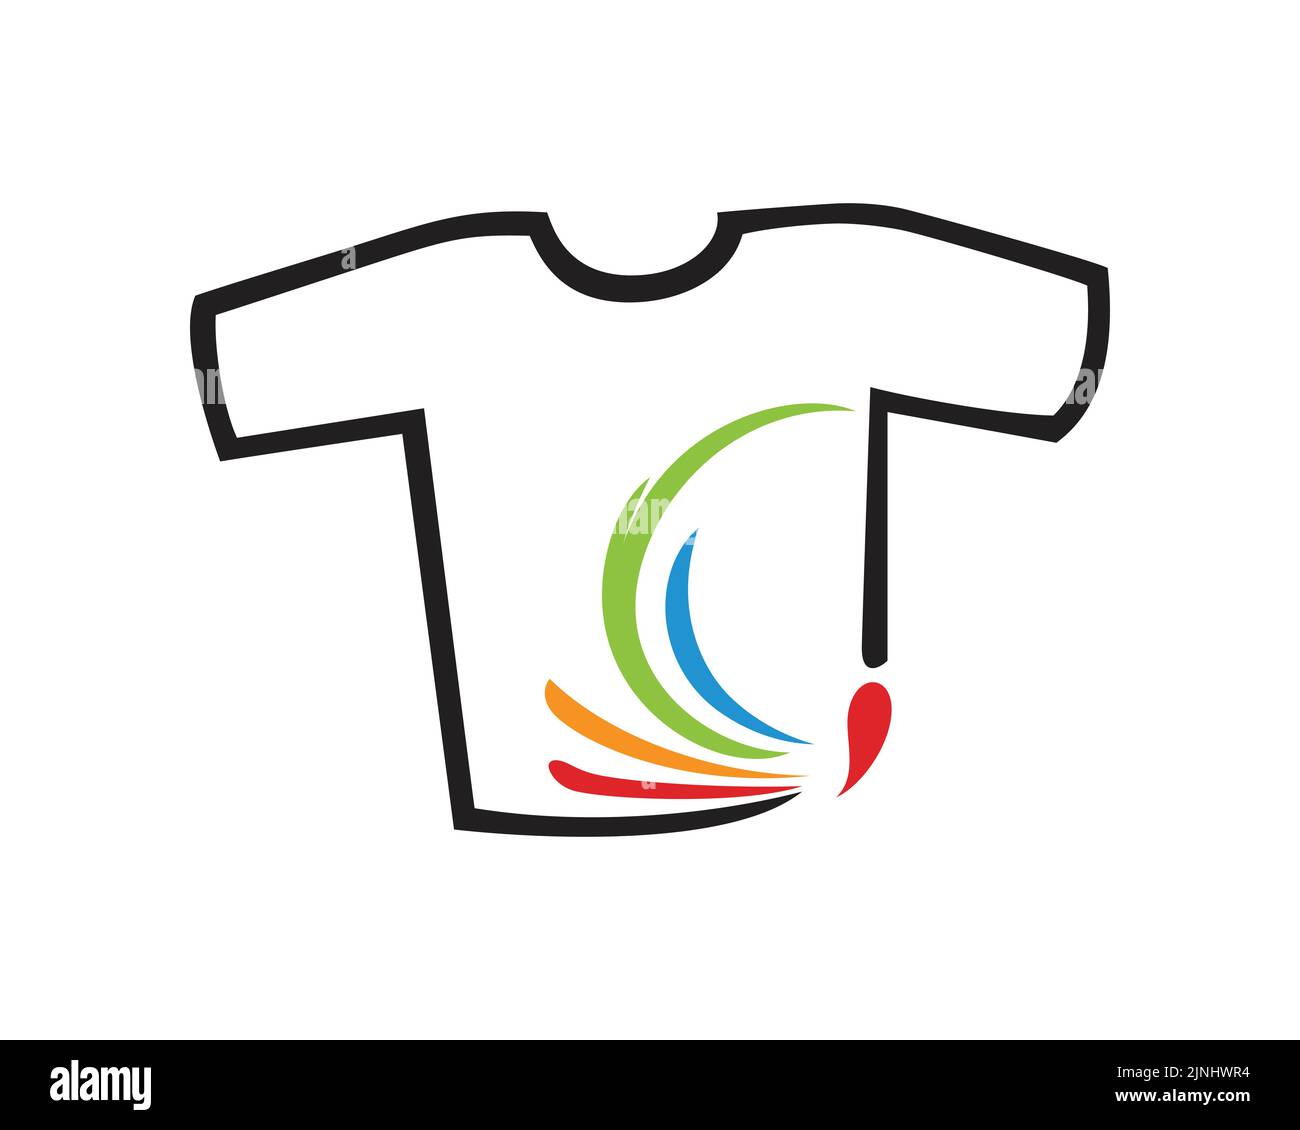 Simple T-Shirt combined with Brush Paint Illustration Stock Vector